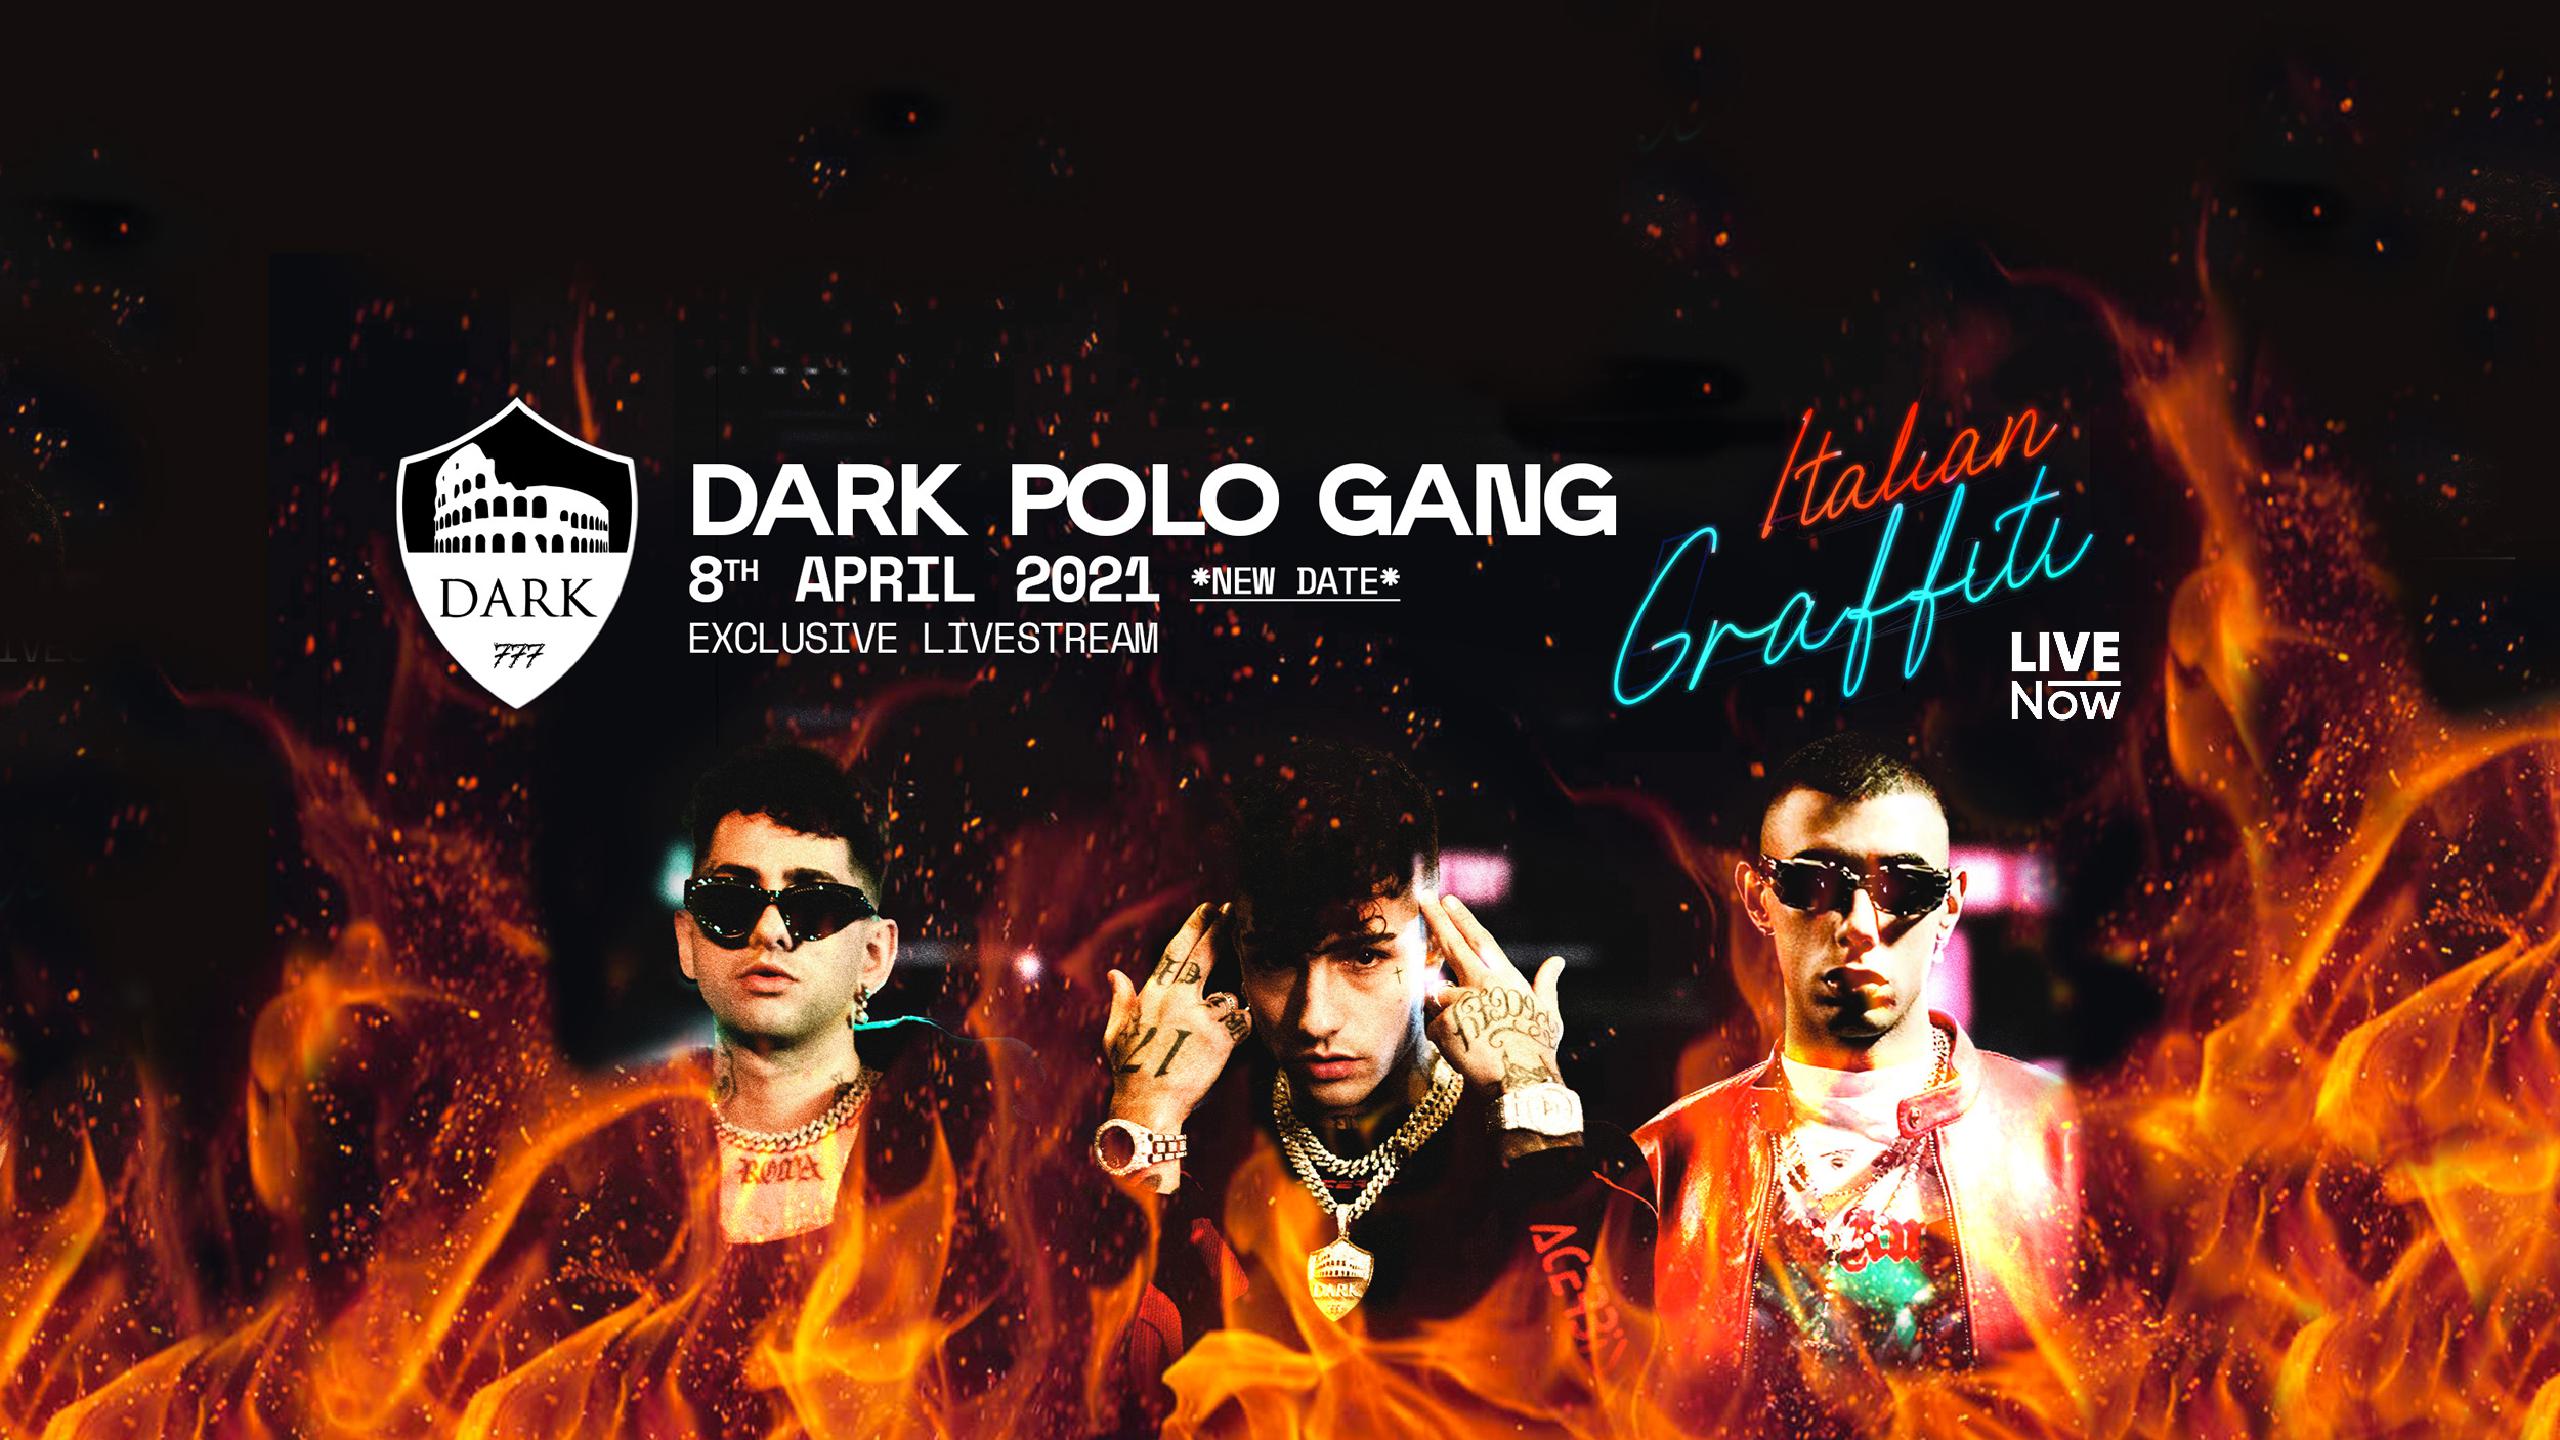 Dark Polo Gang in streaming, tickets, lineup. Wegow United States